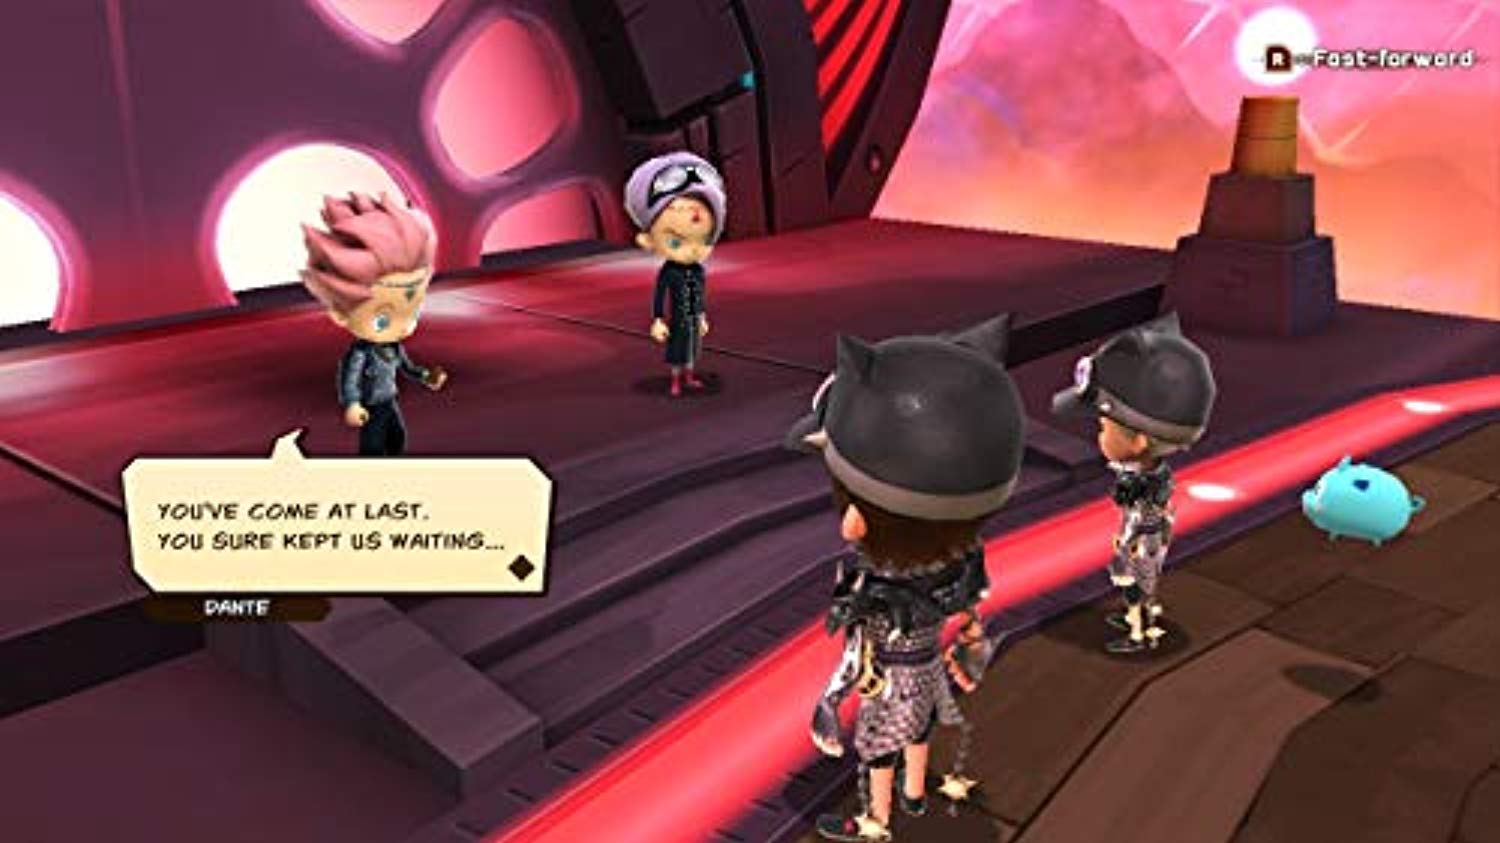 Snack World: The Dungeon Crawl - Gold (Nintendo Switch) - Offer Games